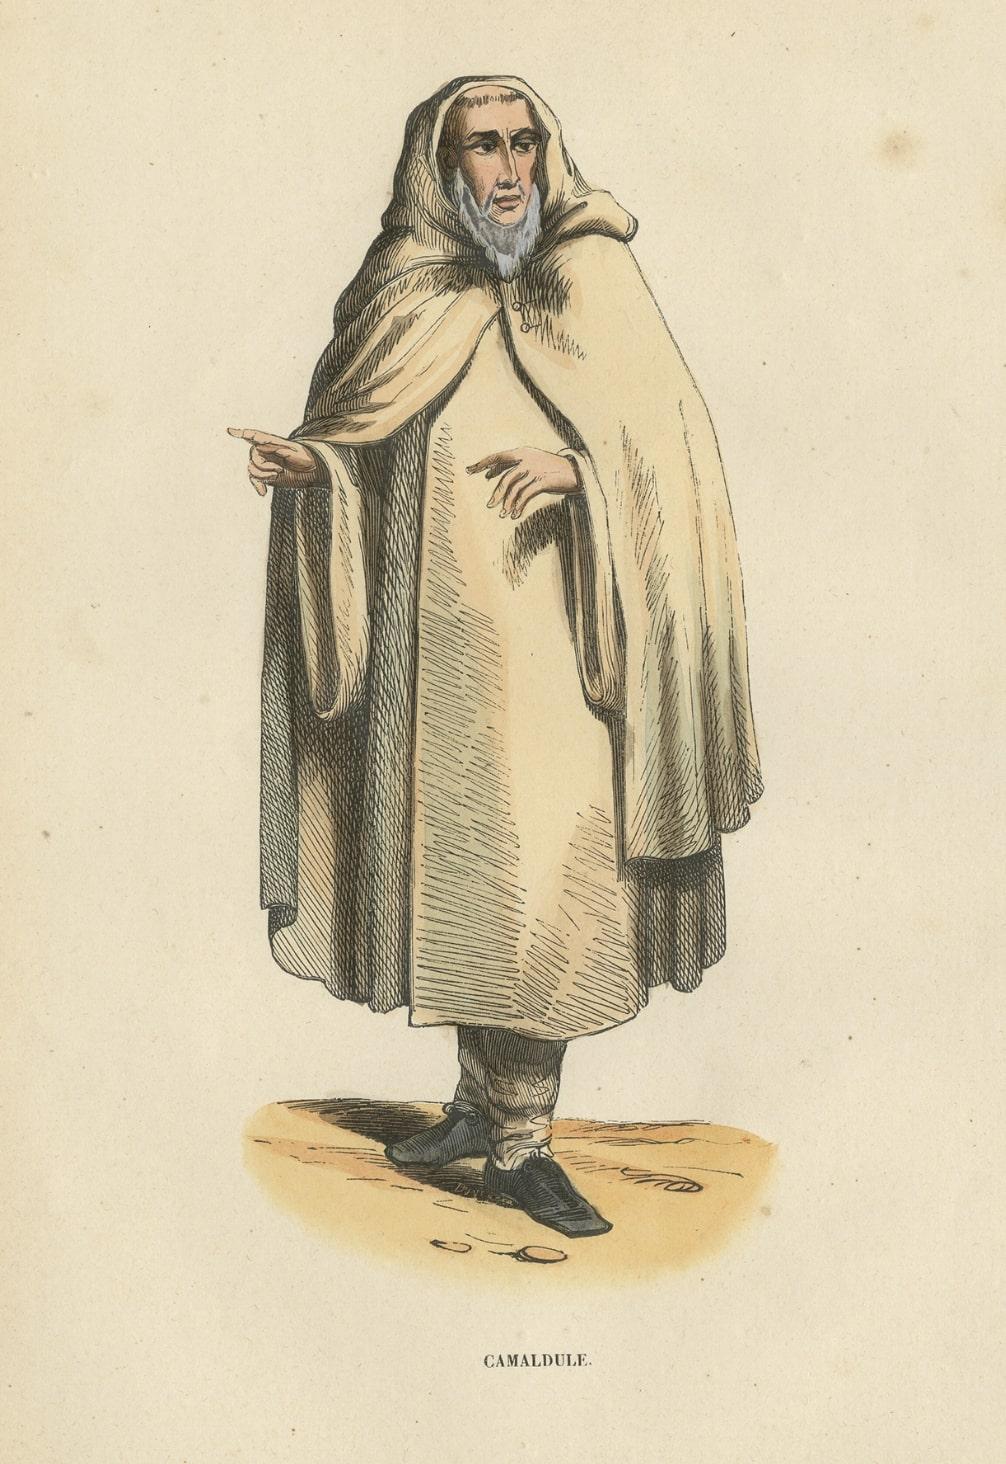 Paper Antique Hand-Colored Print of a Camaldolese Monk, a Hermit of Mount Corona For Sale